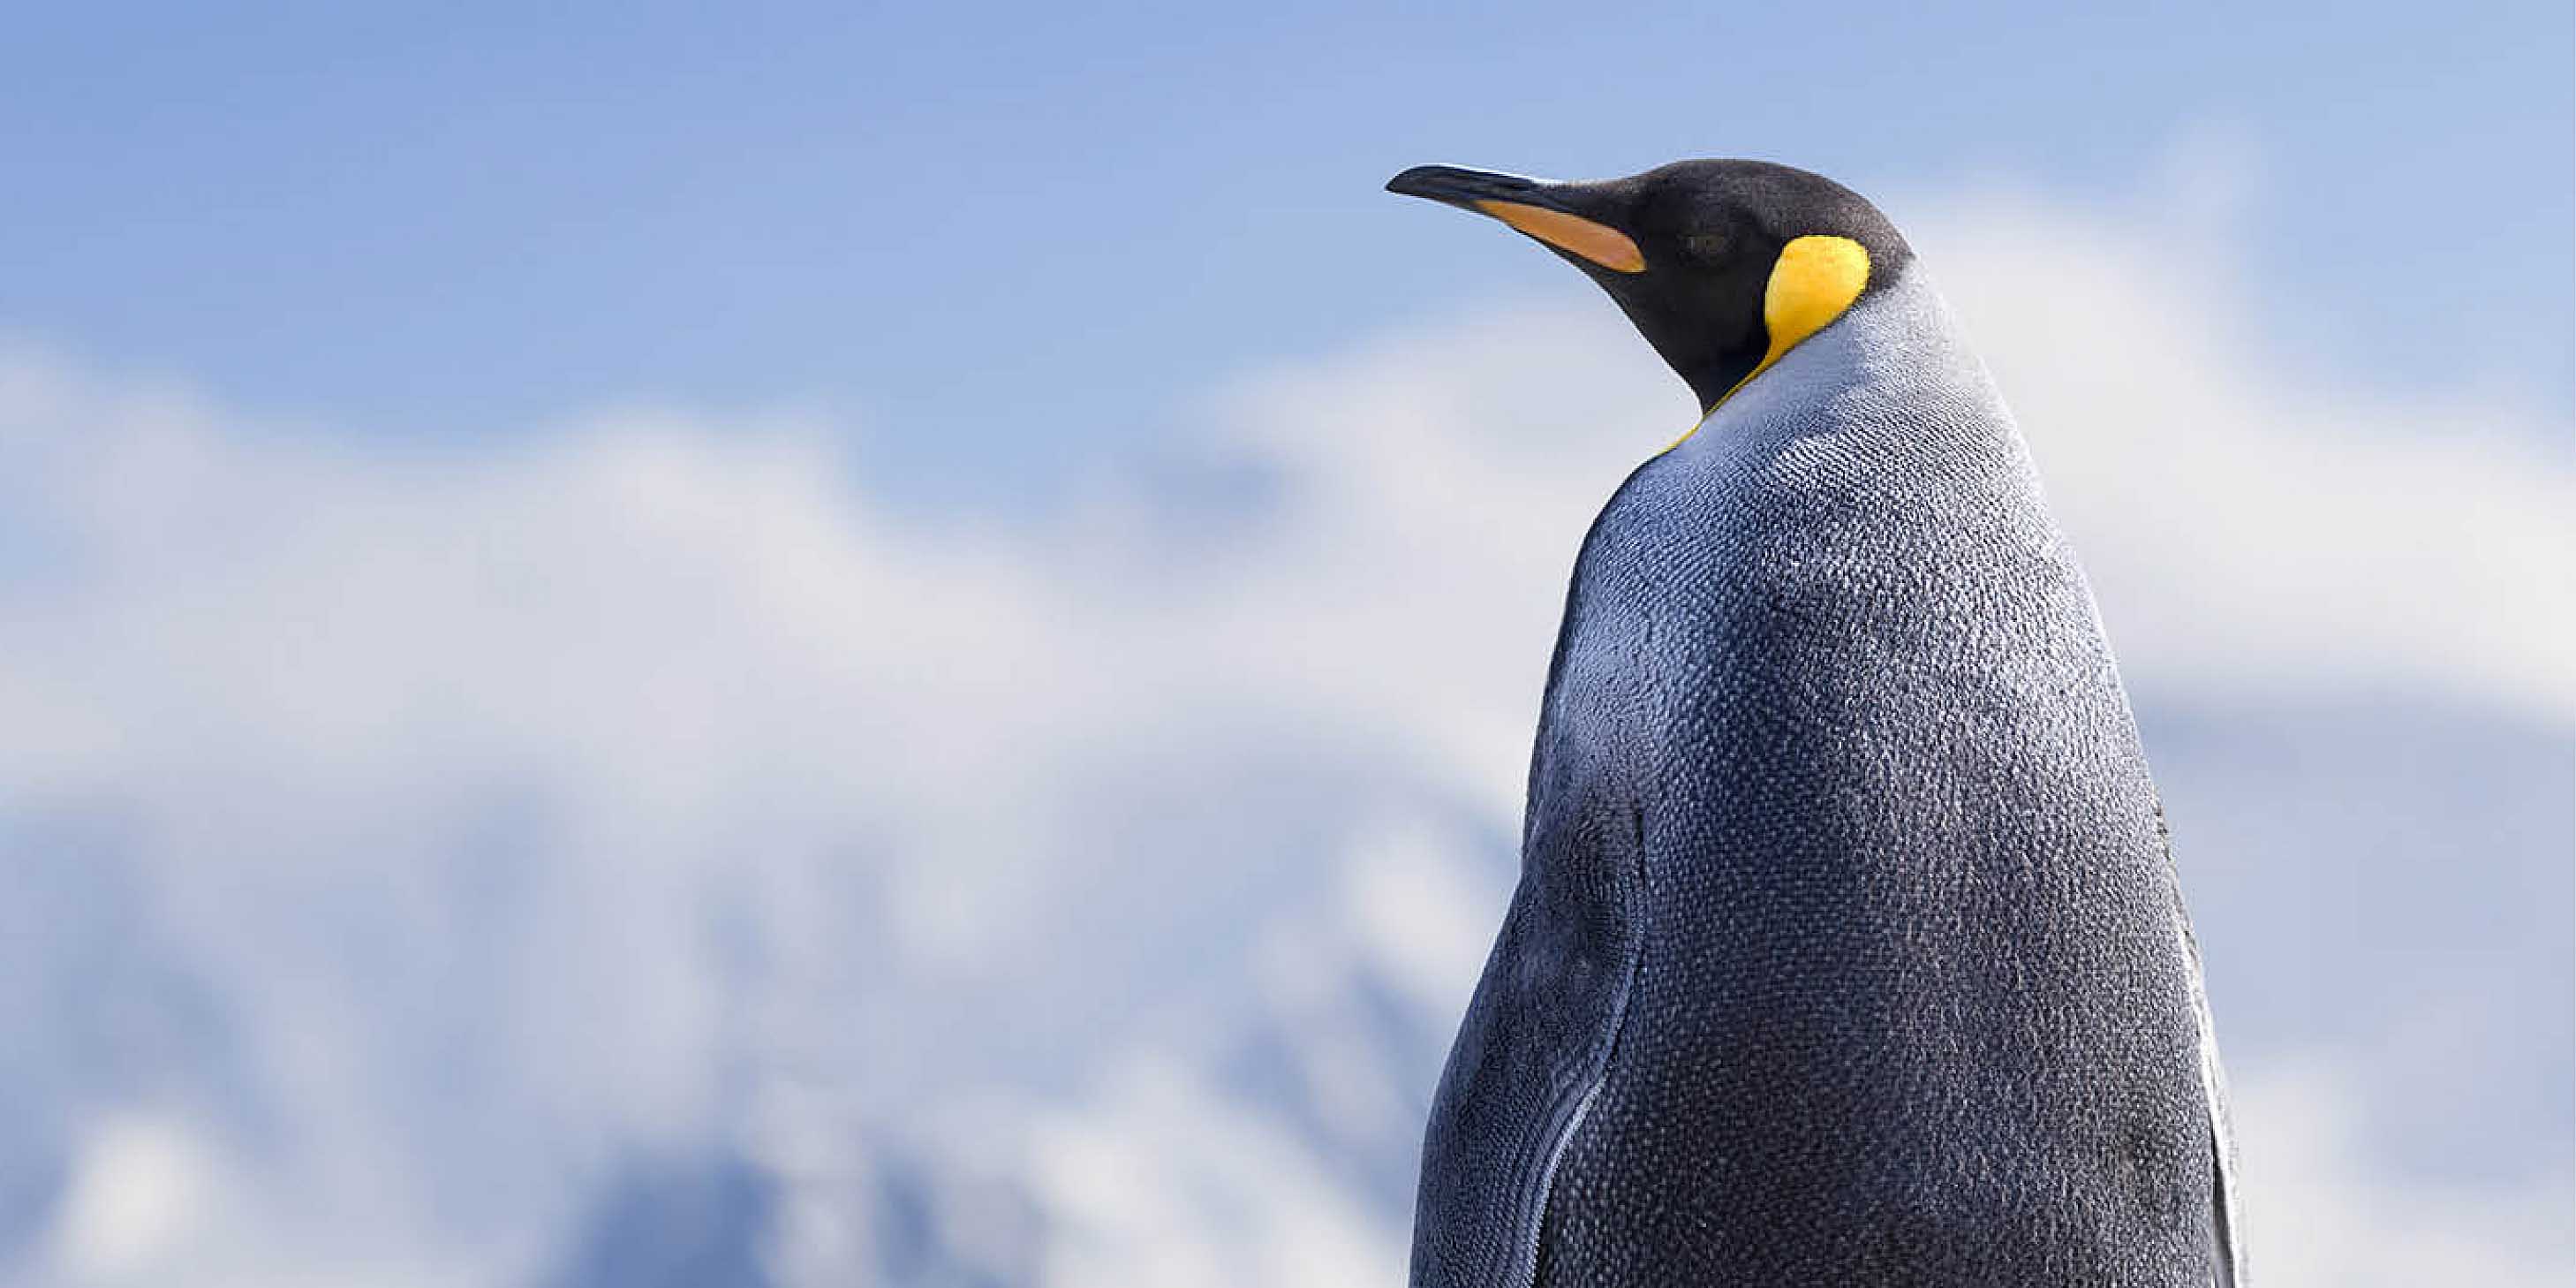 A penguin with a grey coat and striking yellow feathers on its head standing on a rock infront of vast ice.